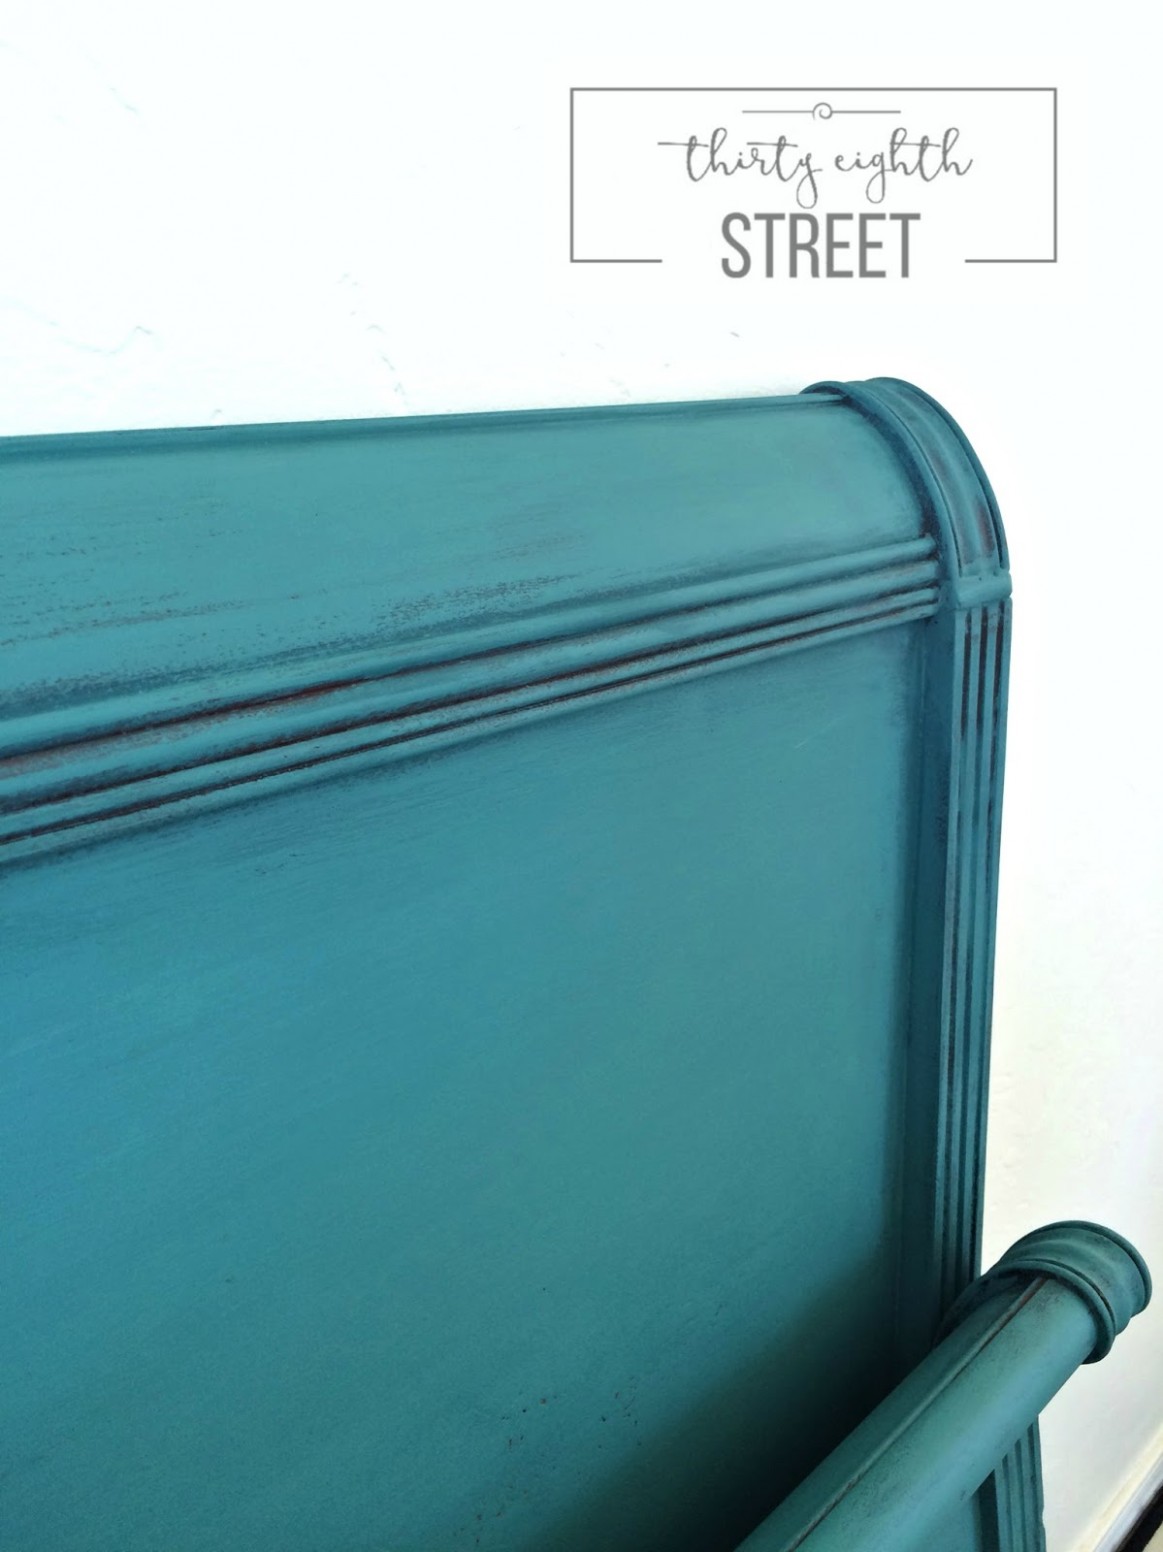 Layering Chalk Paint® On Furniture Thirty Eighth Street Annie Sloan Chalk Paint 2 Color Distressing